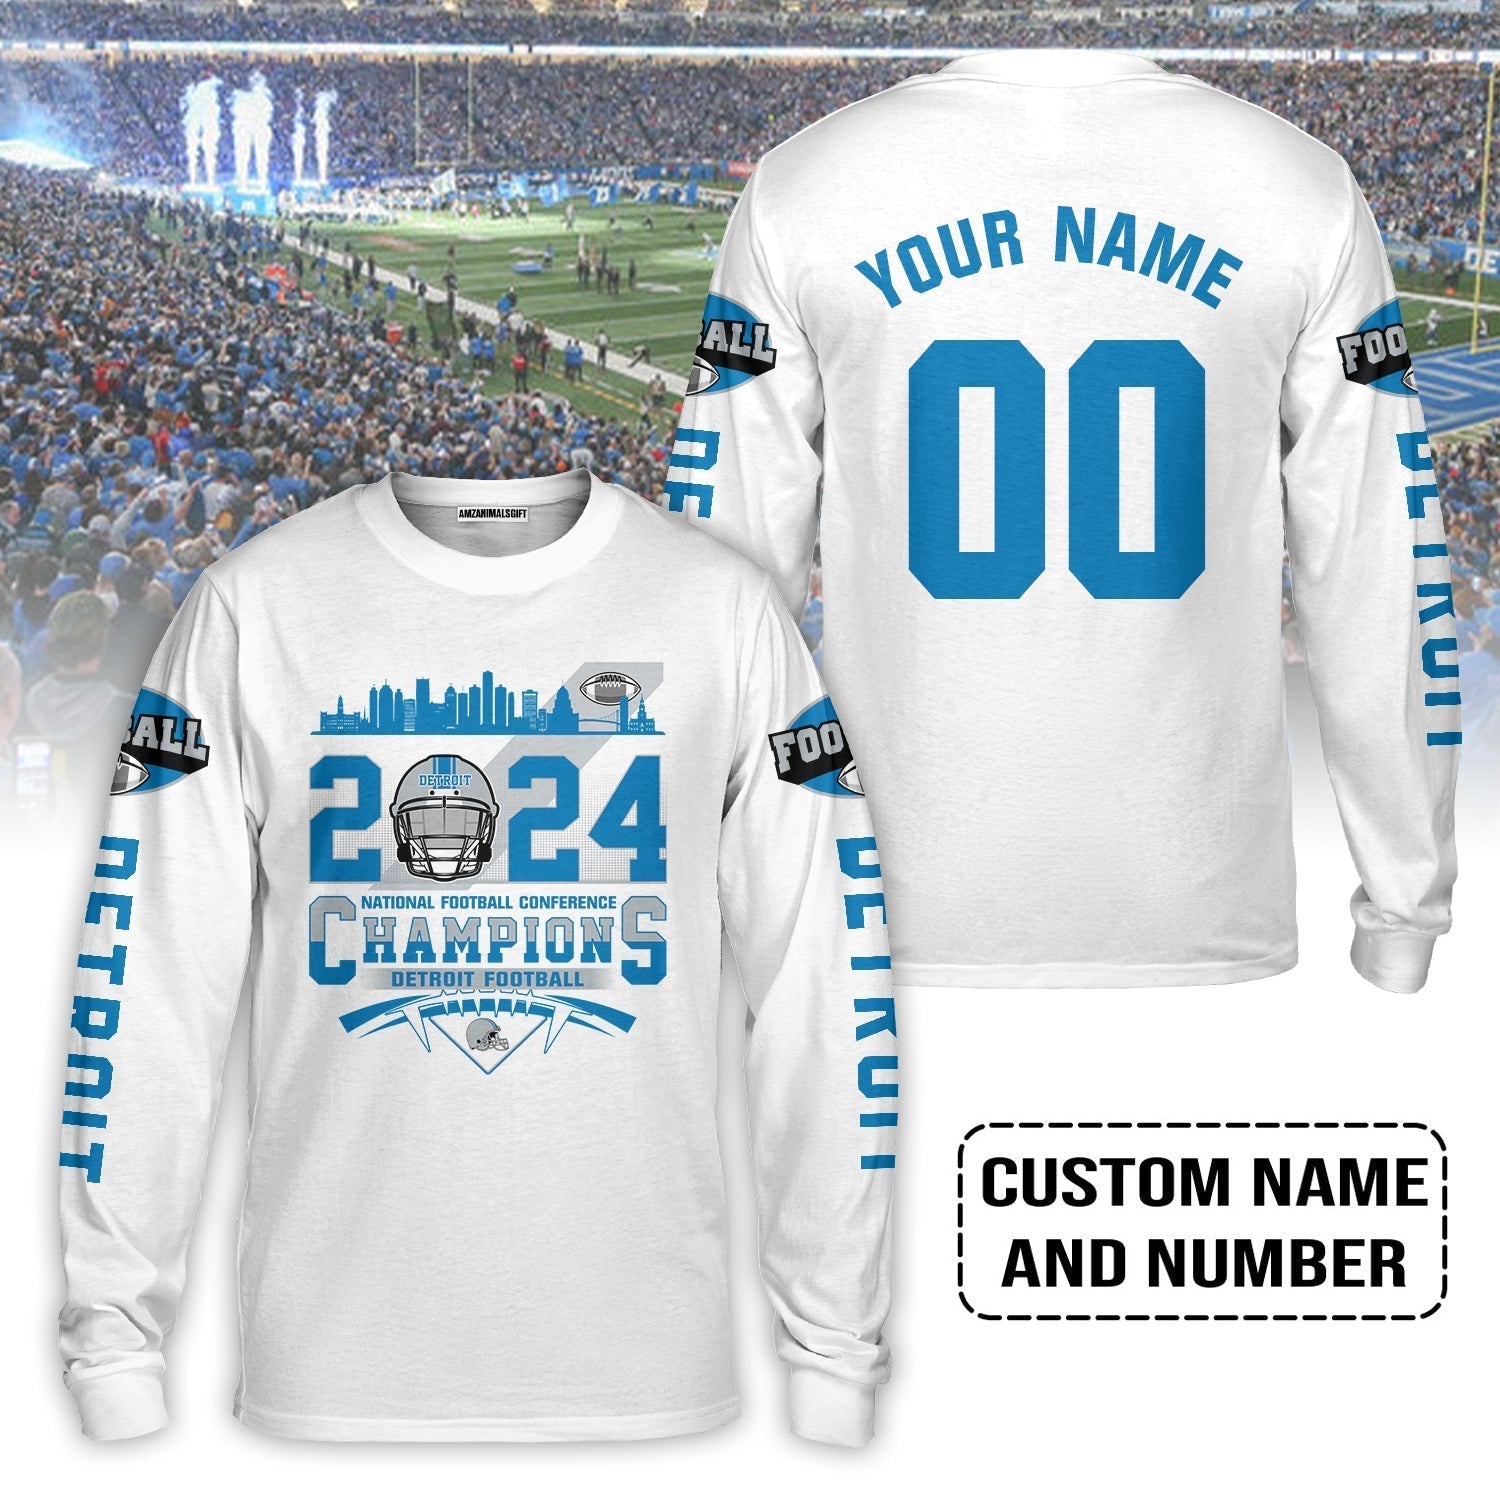 Detroit Football NFC Champions 2023 2024 Custom Name Number Long Sleeve Shirts, Conquered The NFC Champions Apparel And Gear For Detroit Fans